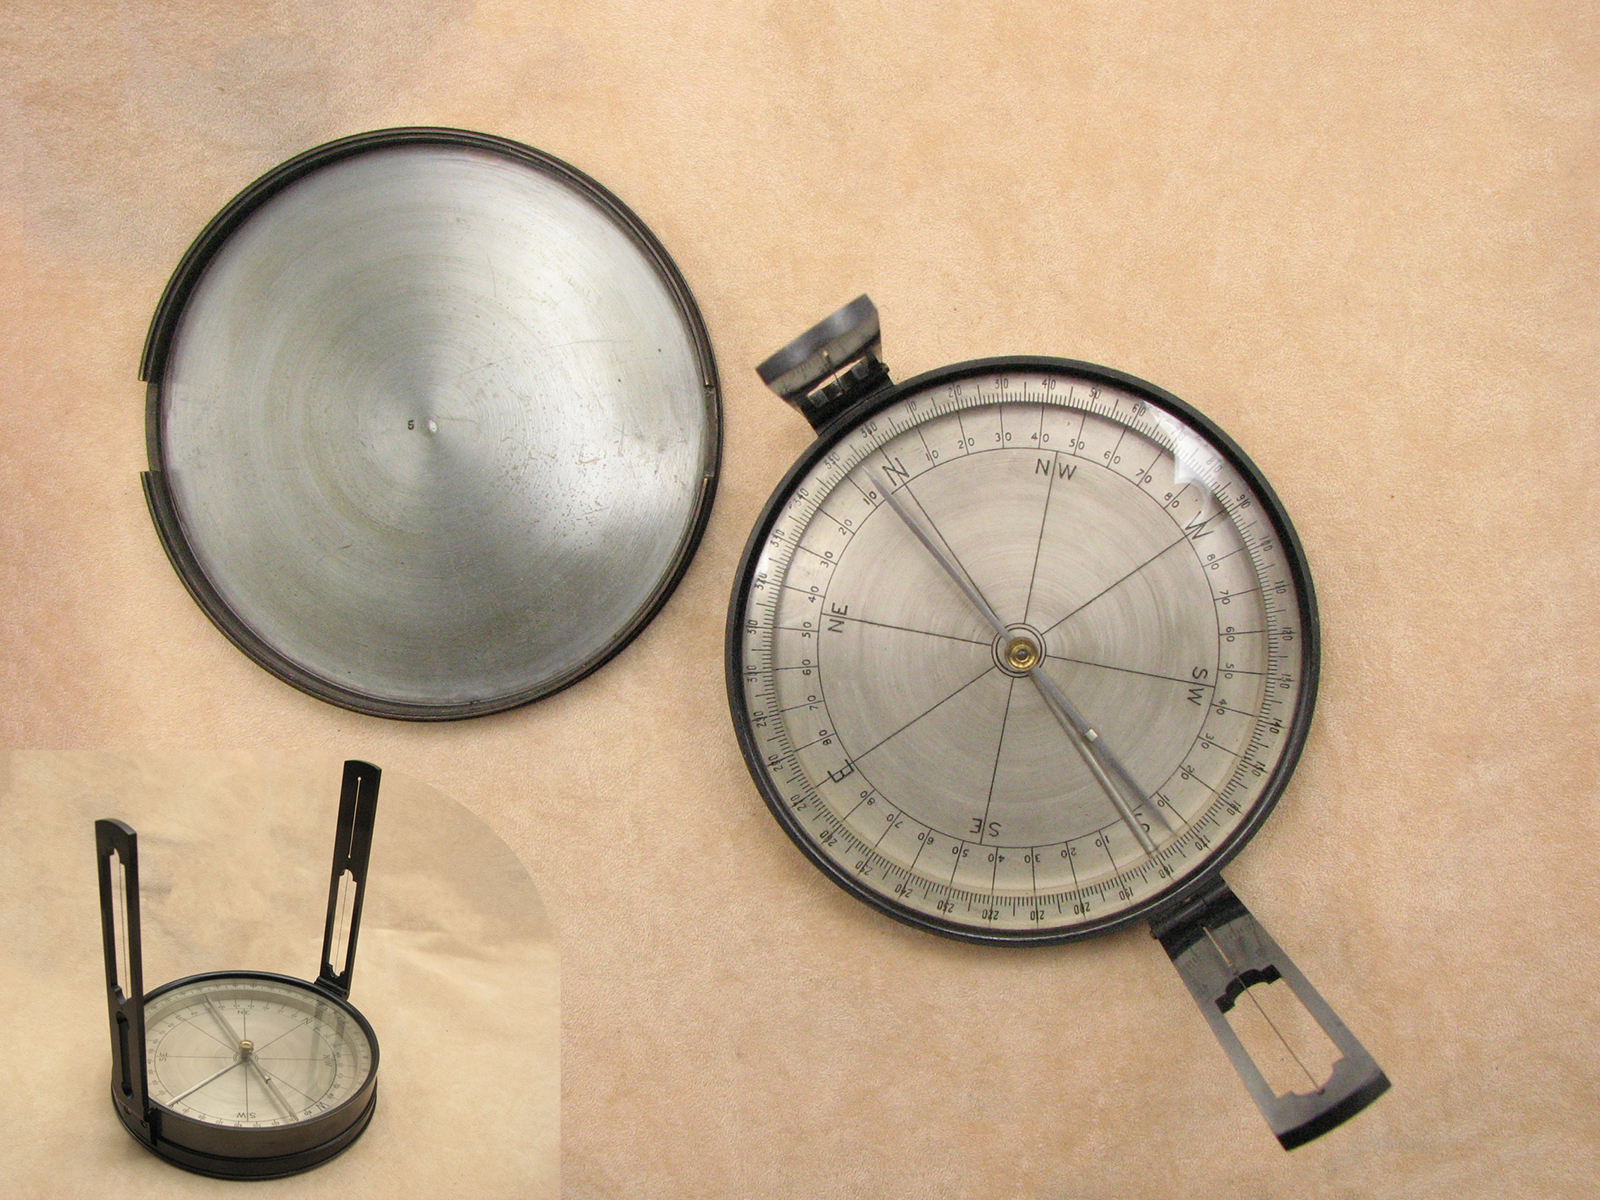 Late 19th century surveying compass by Thomas Cooke & Sons